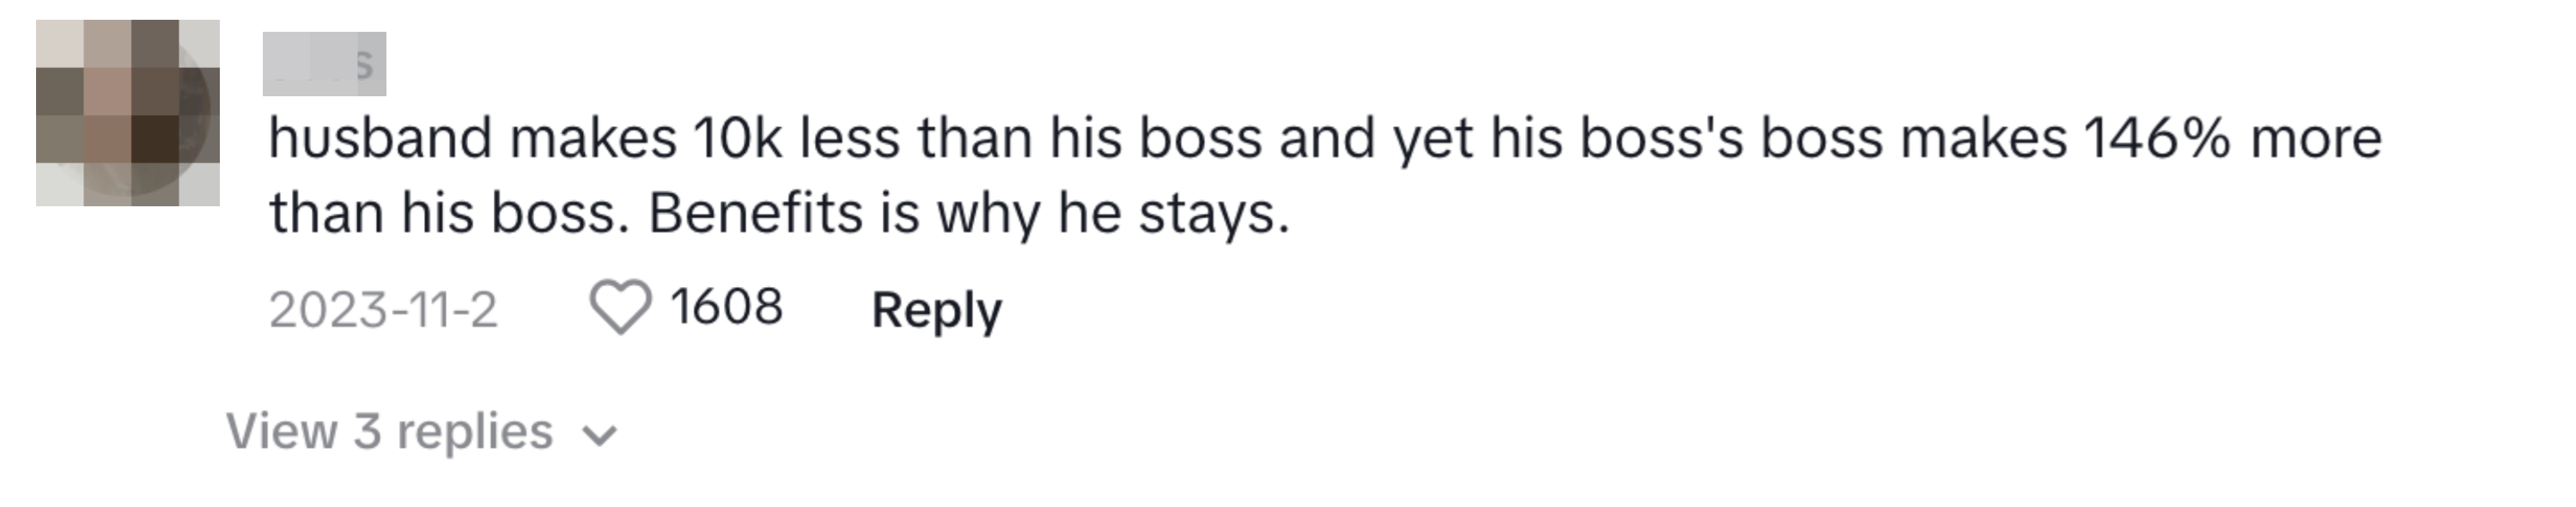 &quot;[My] husband makes $10,000 less than his boss and yet his boss&#x27; boss makes 146% more than his boss.&quot;